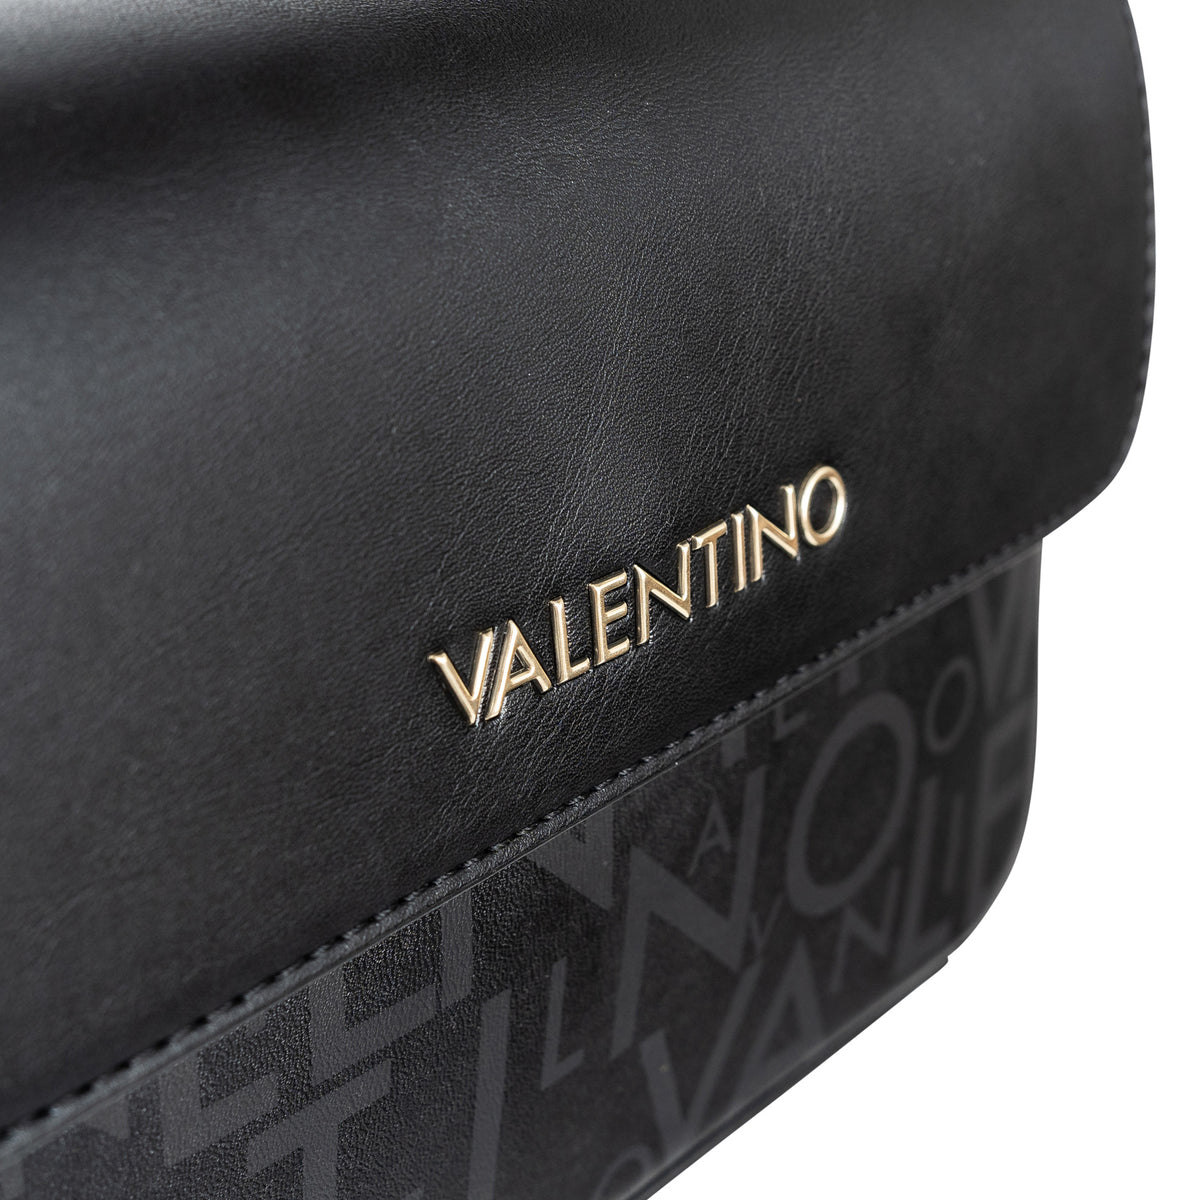 Load image into Gallery viewer, Valentino Bags Black Burritos Cross Body Bag
